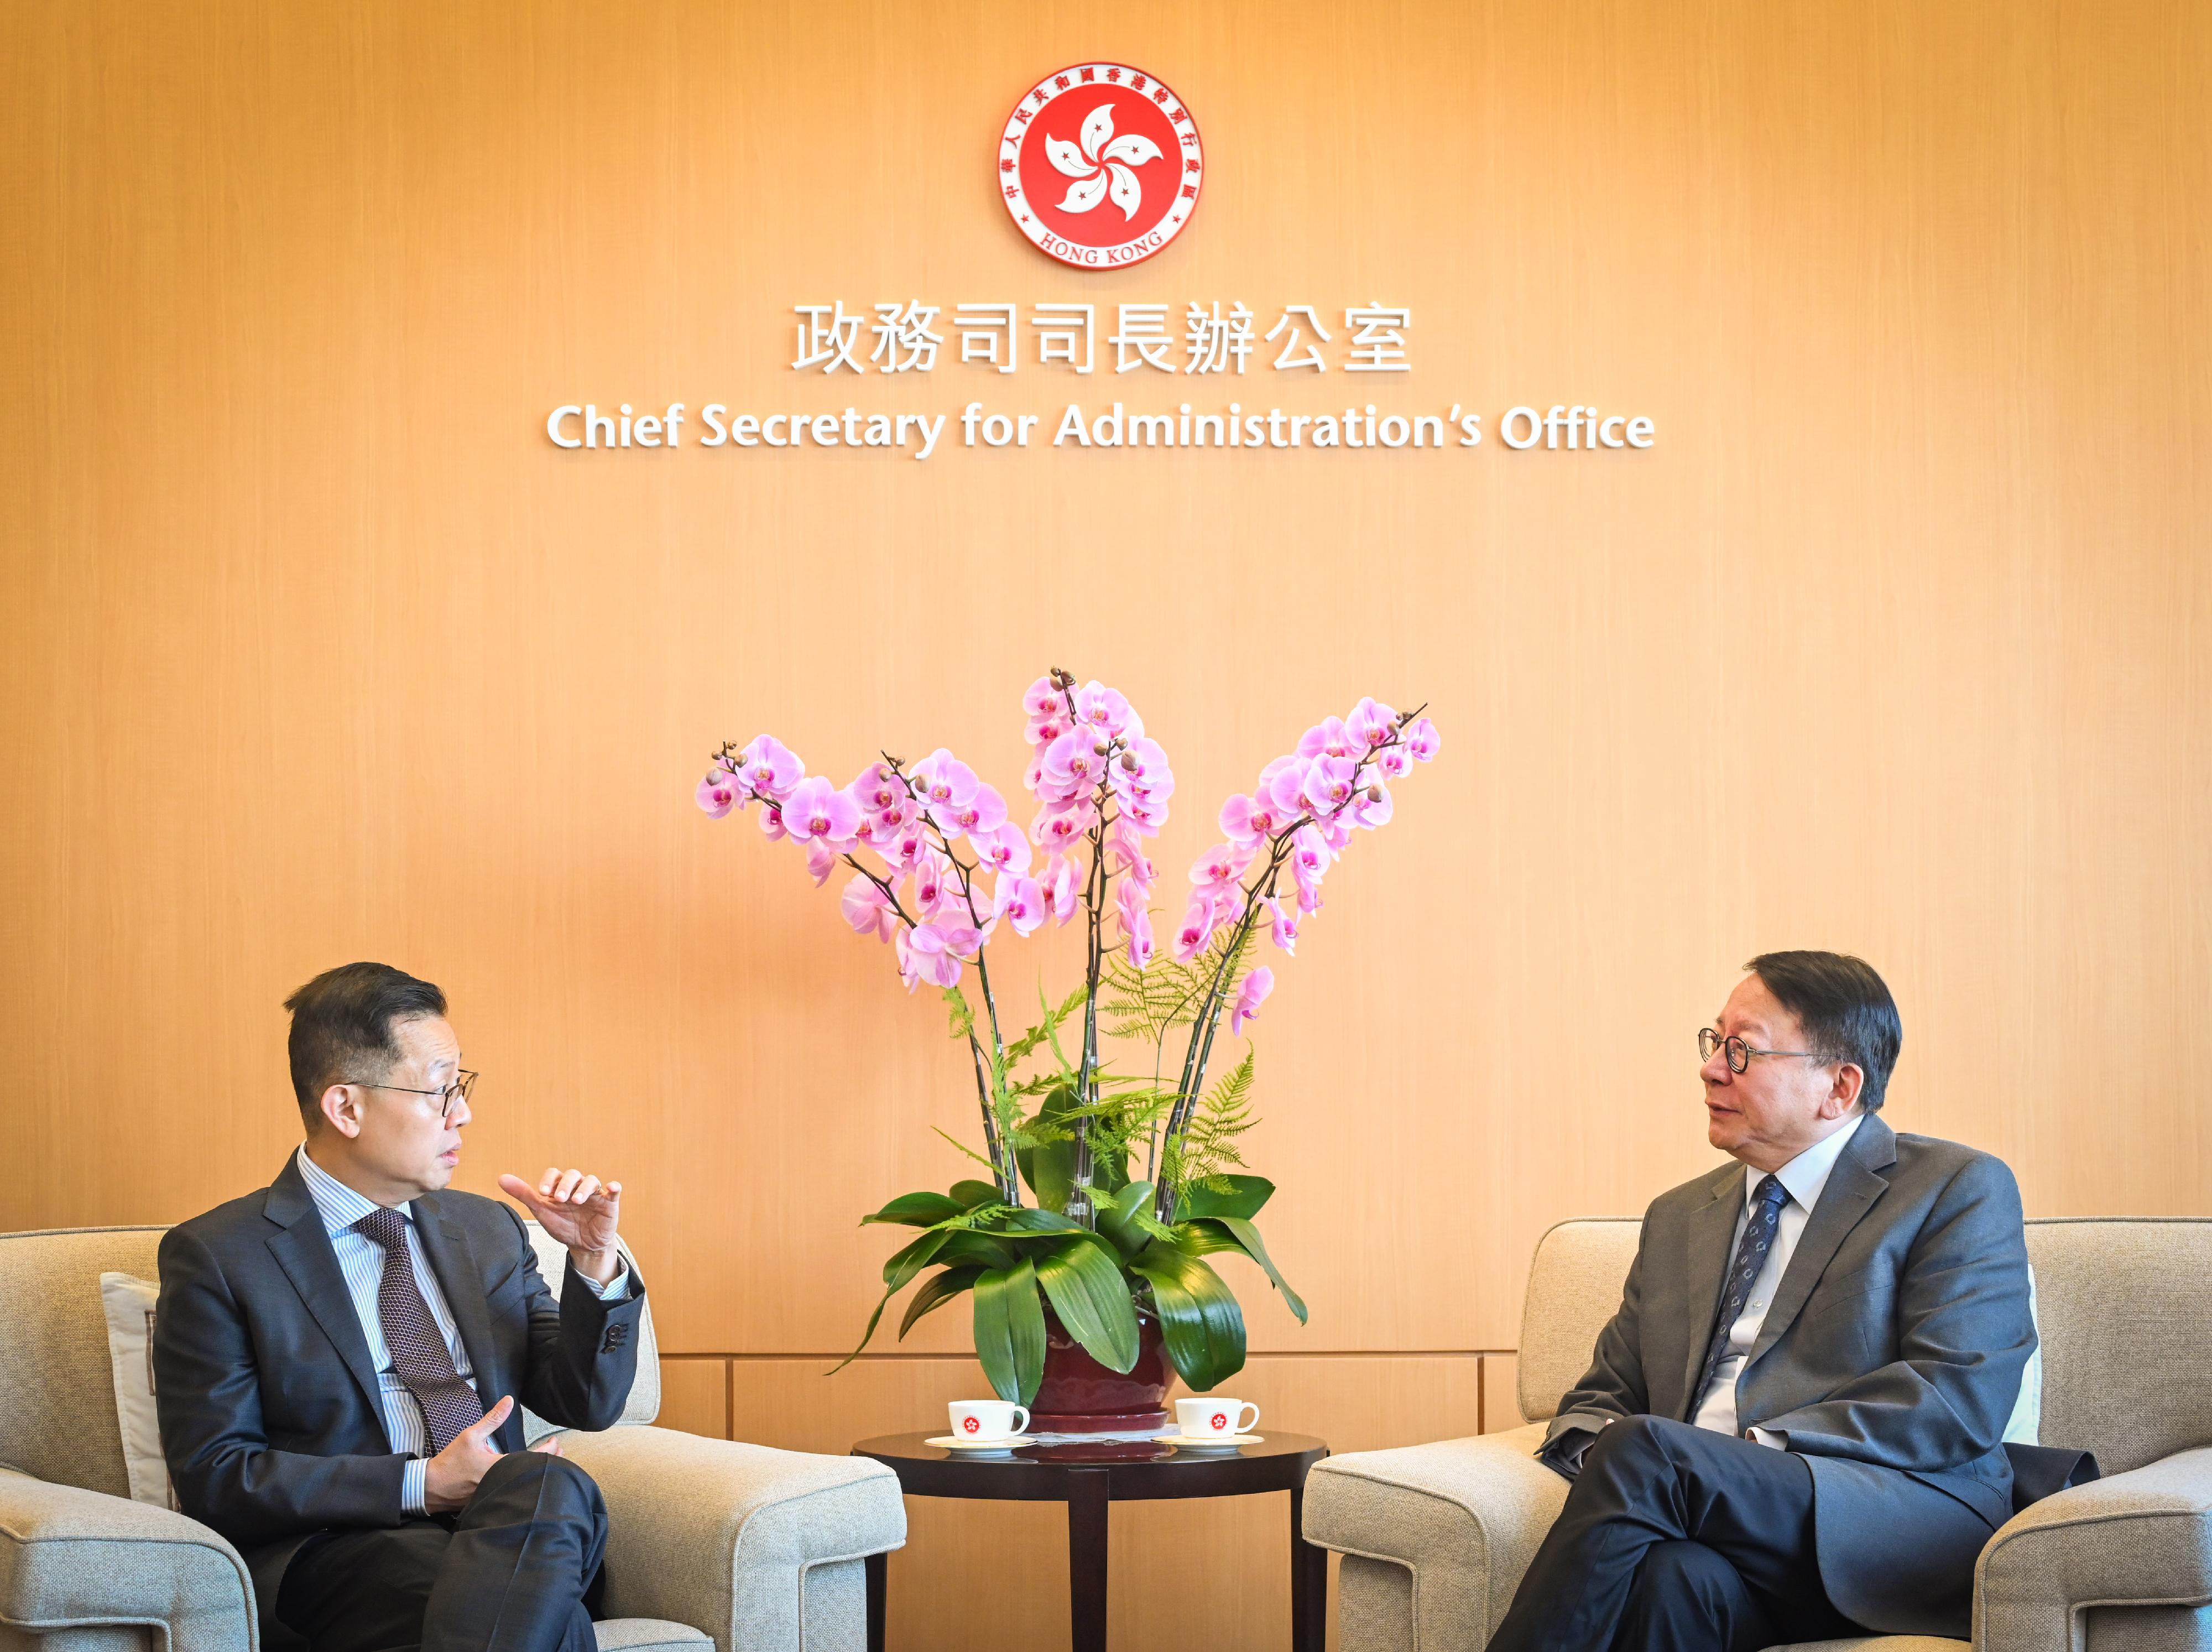 The Chief Secretary for Administration, Mr Chan Kwok-ki, today (November 24) met with the delegation led by the Head of Civil Service of Singapore, Mr Leo Yip, under the Singapore-Hong Kong Permanent Secretaries Exchange Programme at the Central Government Offices. Photo shows Mr Chan (right) and Mr Yip (left) exchanging their views and experience on the policy initiatives in building a caring and inclusive society.